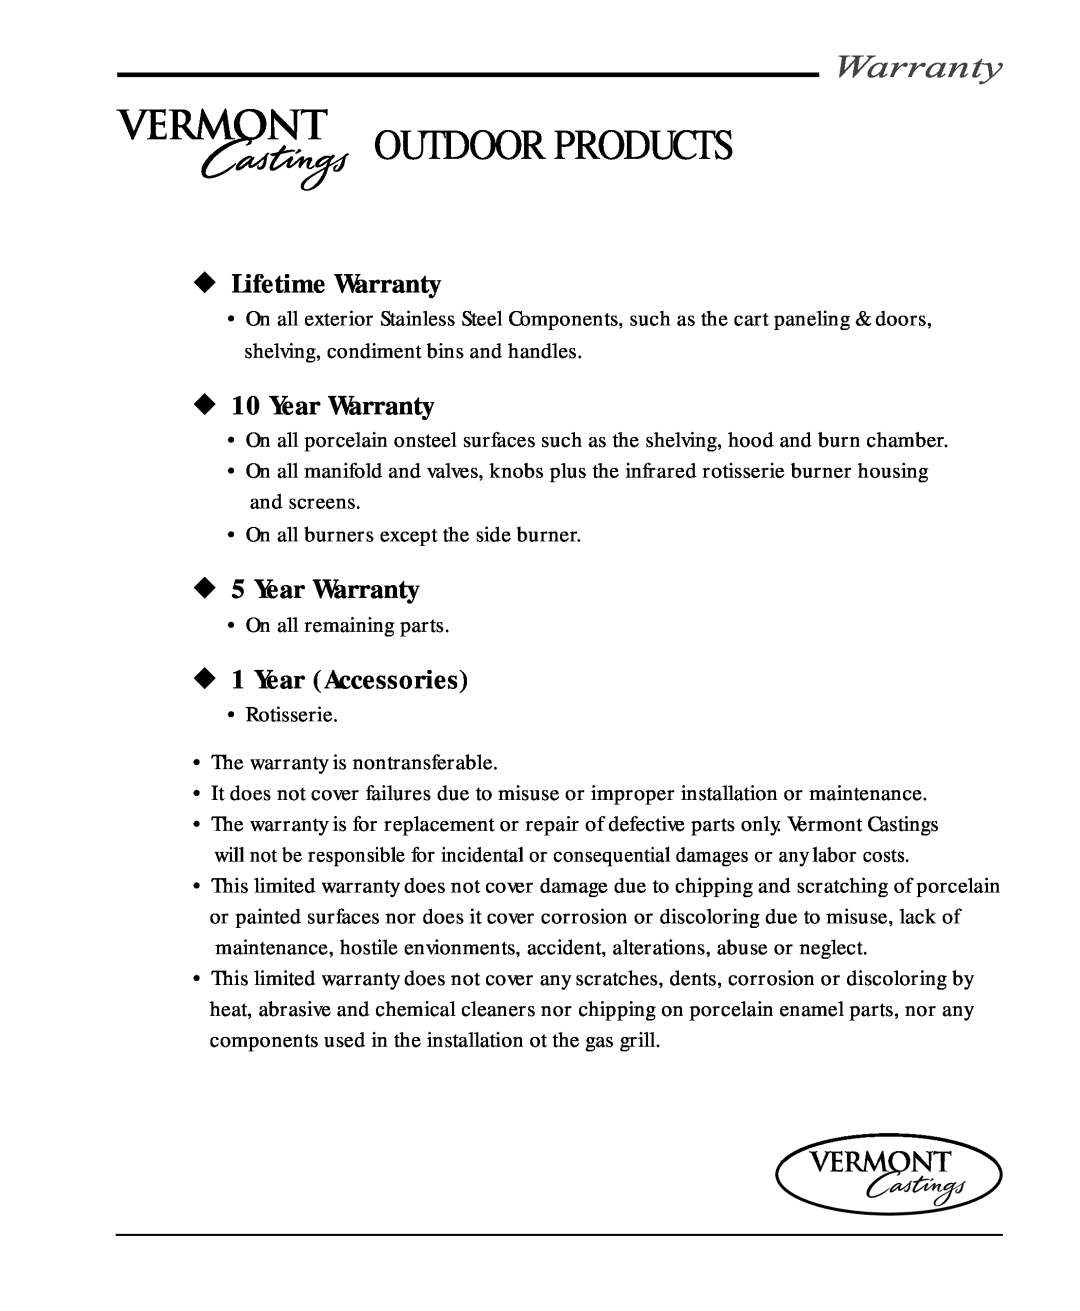 Vermont Casting VC400, VC200 user manual Lifetime Warranty, Year Warranty, Year Accessories, Outdoor Products 